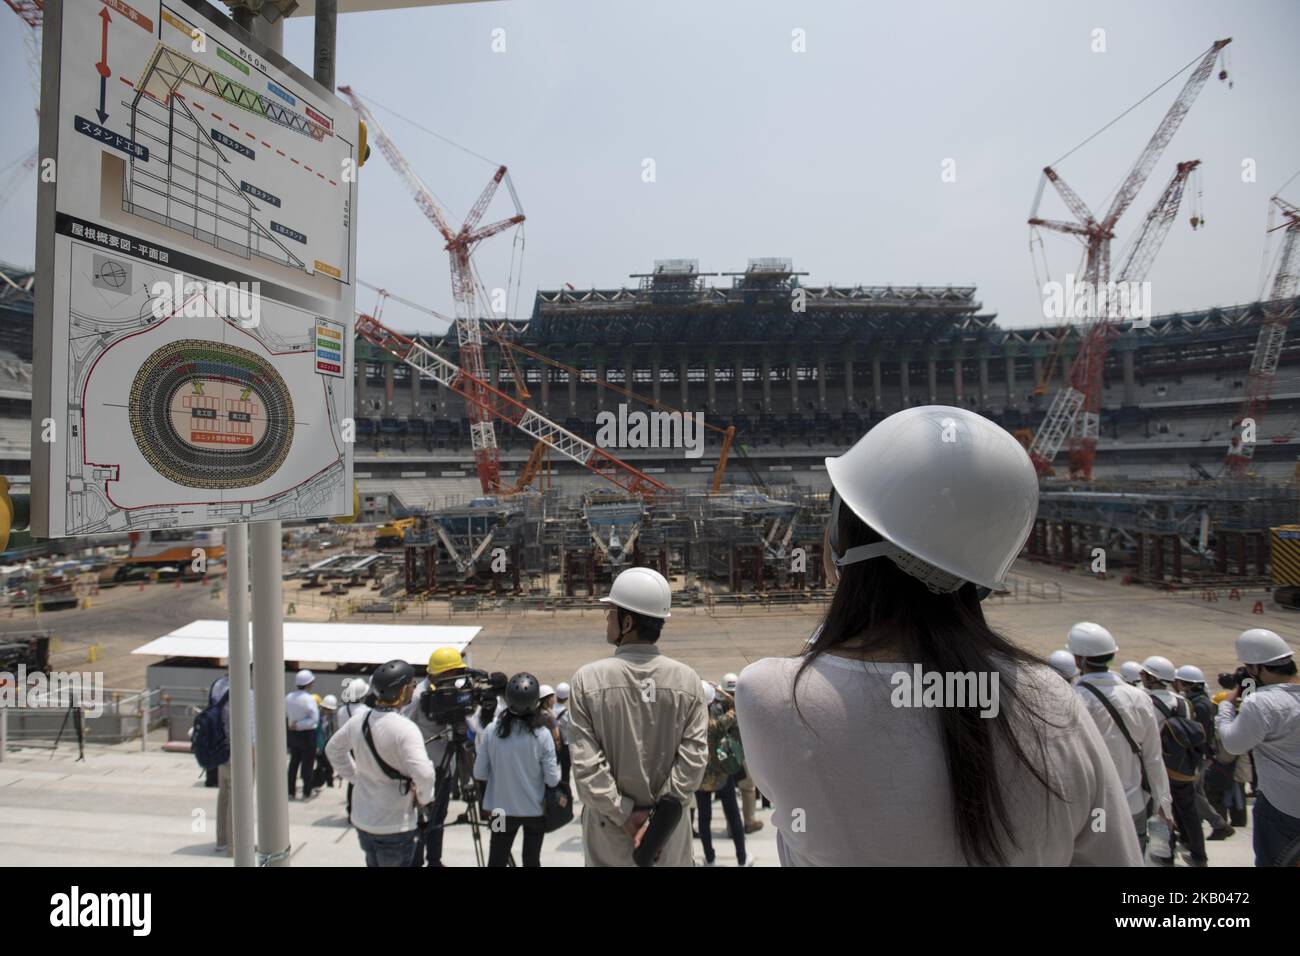 A general view during the Tokyo 2020 Olympic new National Stadium construction media tour on July 18, 2018 in Tokyo, Japan. The current tempature inside the stadium as 38.1 degrees celsius. 2020 Tokyo Olympics and Paralympics will be the first Olympic Games in Japan in 56 years since 1964. Opening and Closing ceremony will be held at this stadium. (Photo by Alessandro Di Ciommo/NurPhoto) Stock Photo